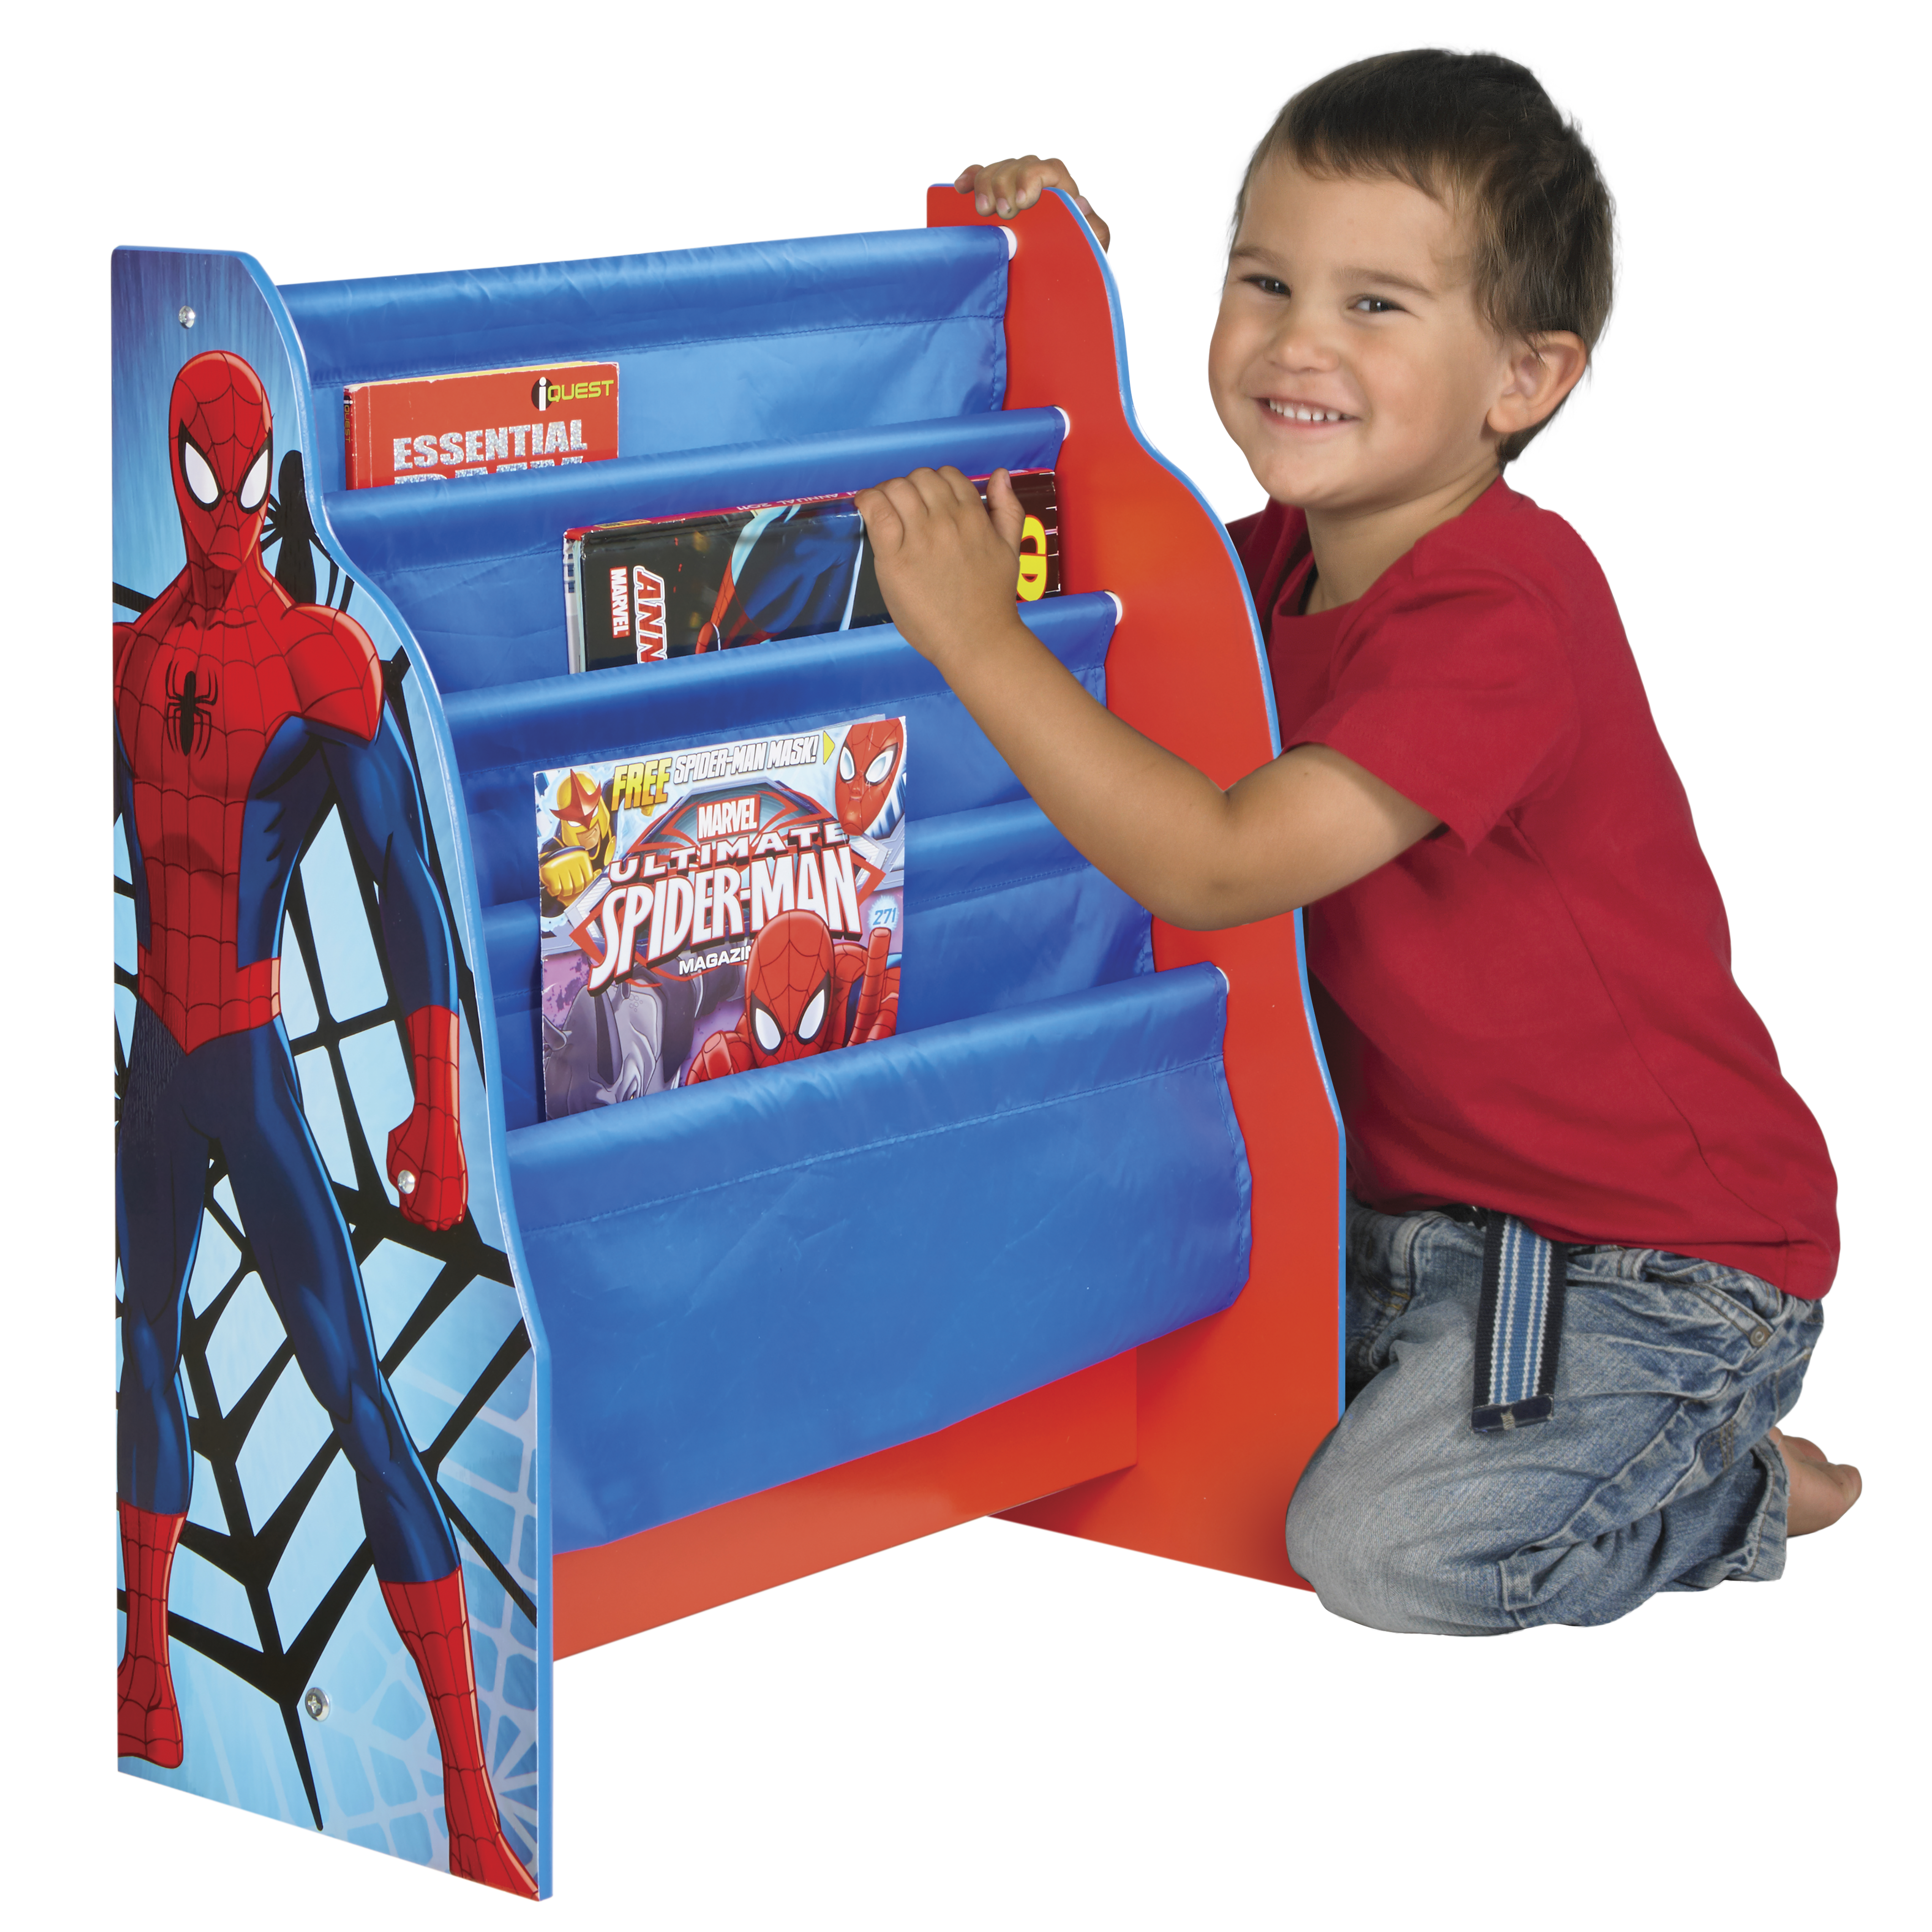 470SIALead Product ModelUltimate SpiderMan Sling Bookcase